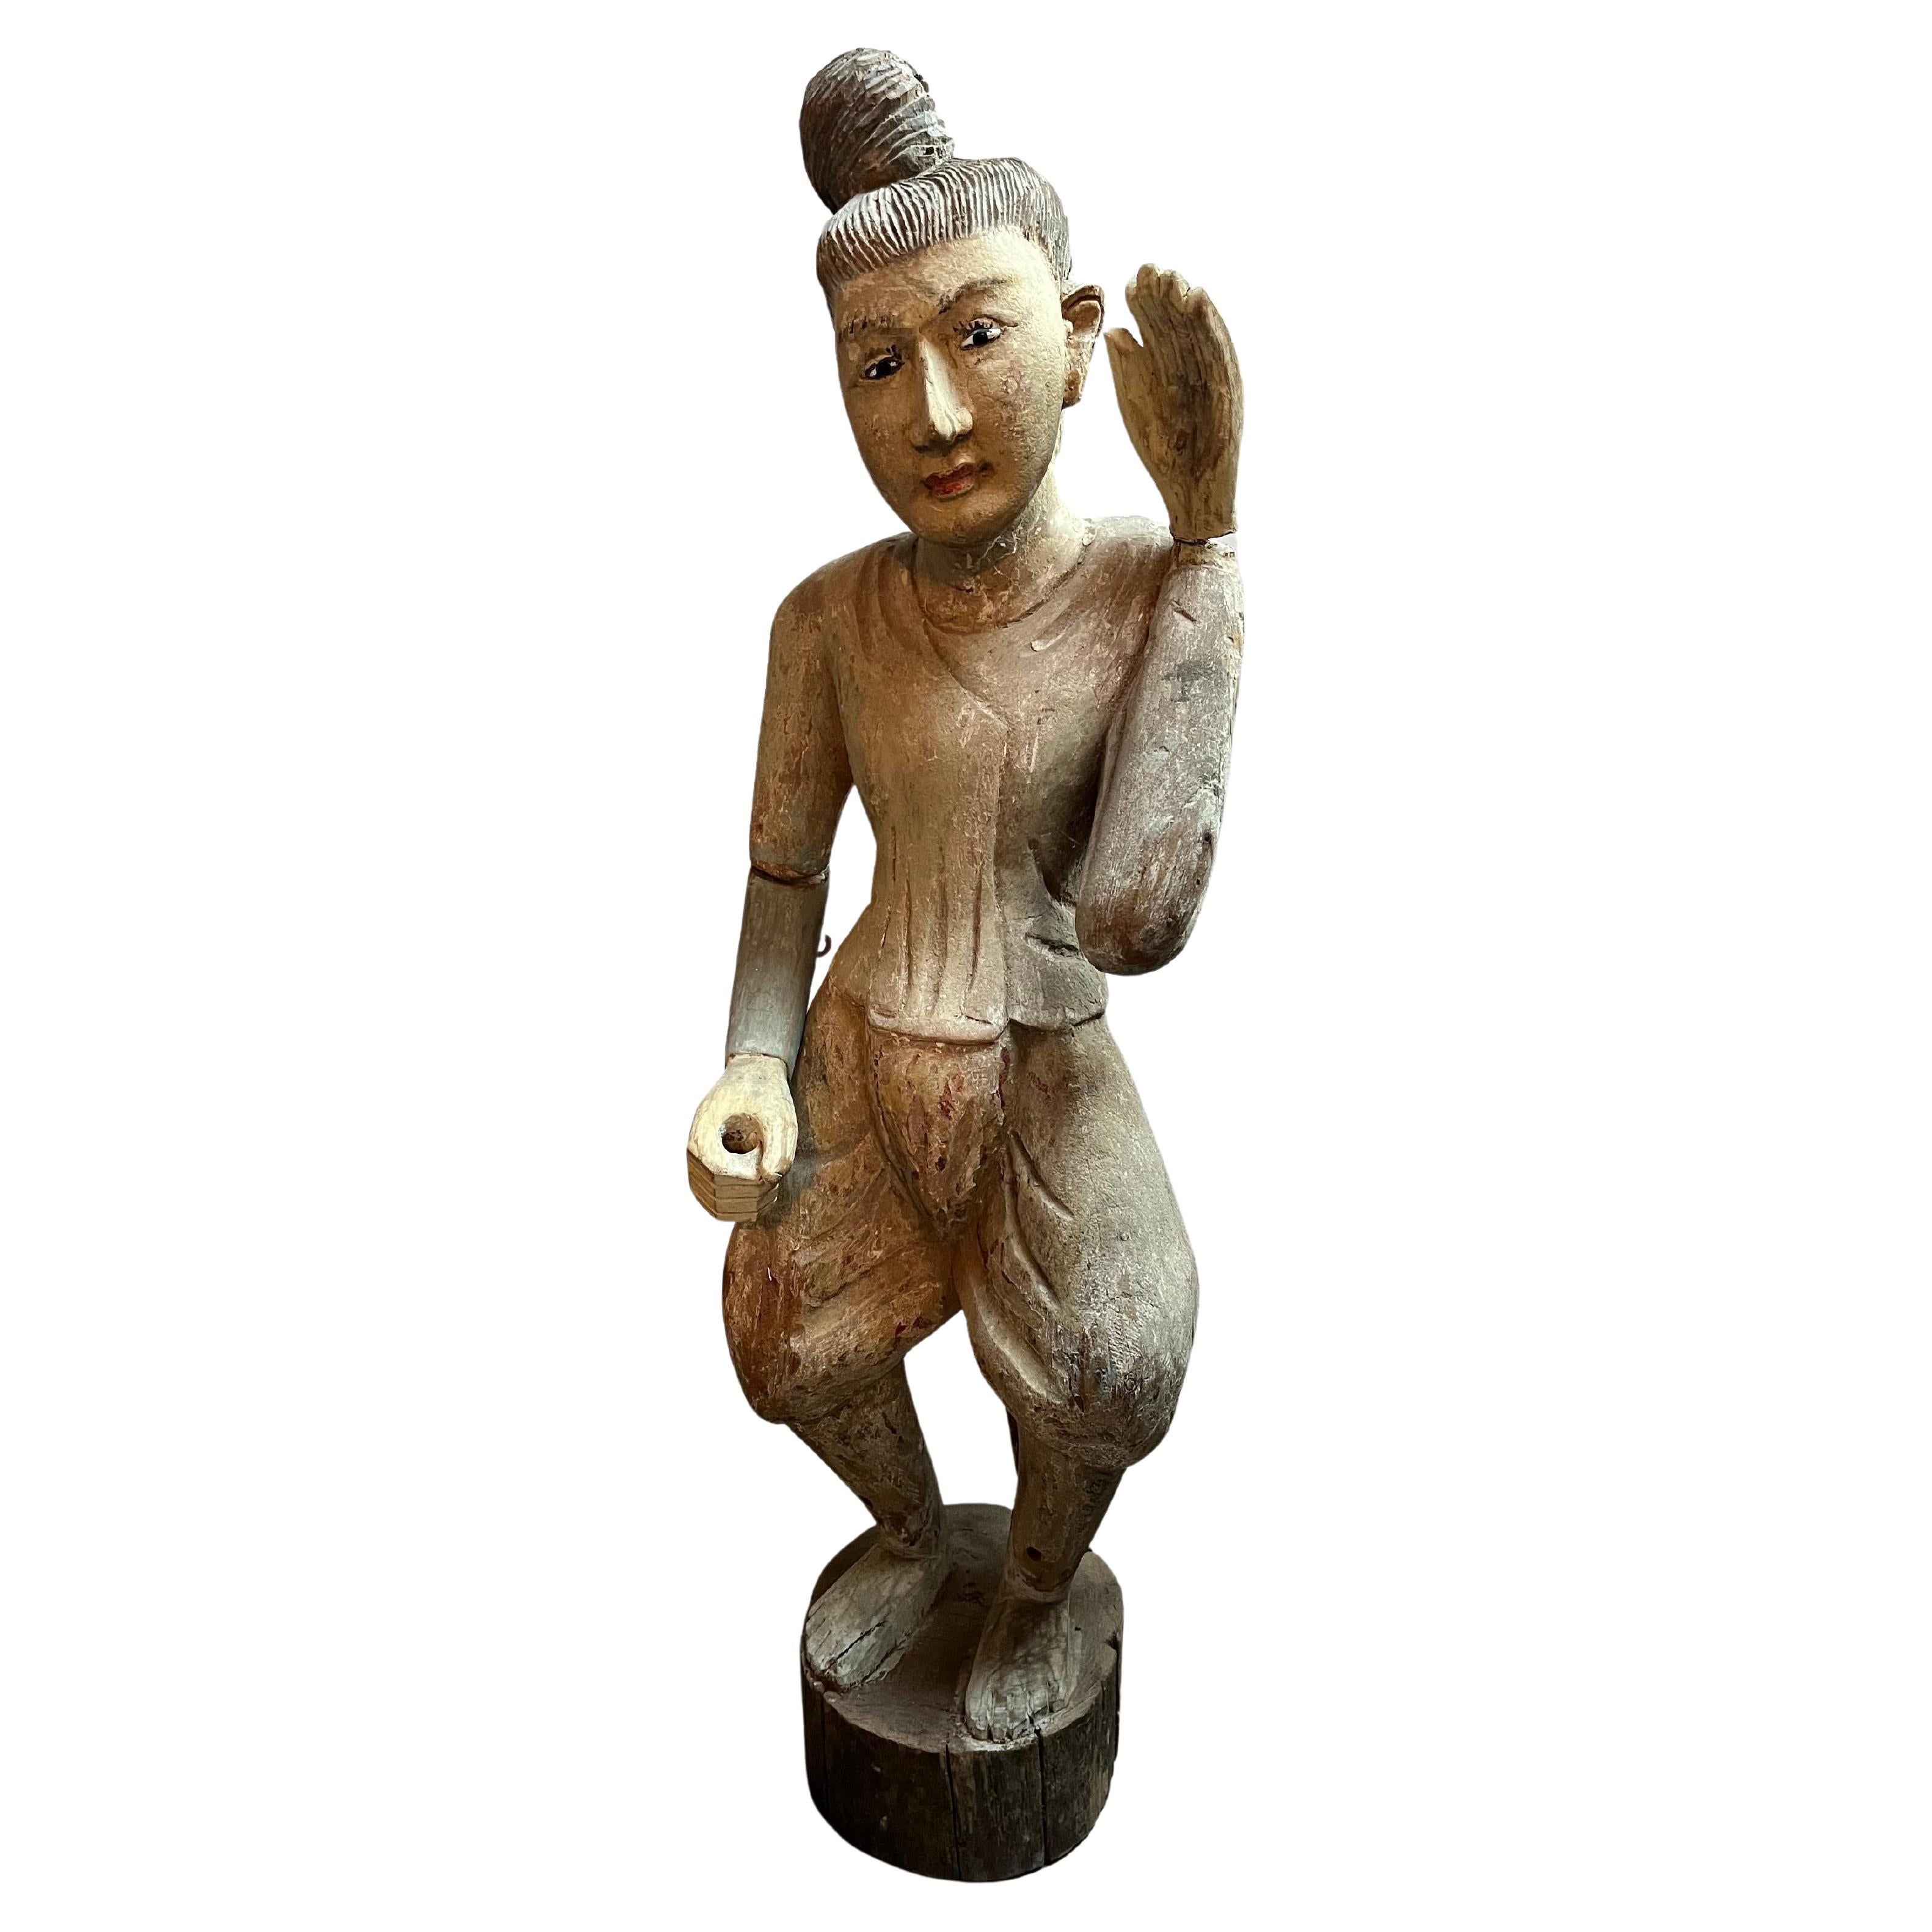 Balinese Carved Wood Statue of a Dancer